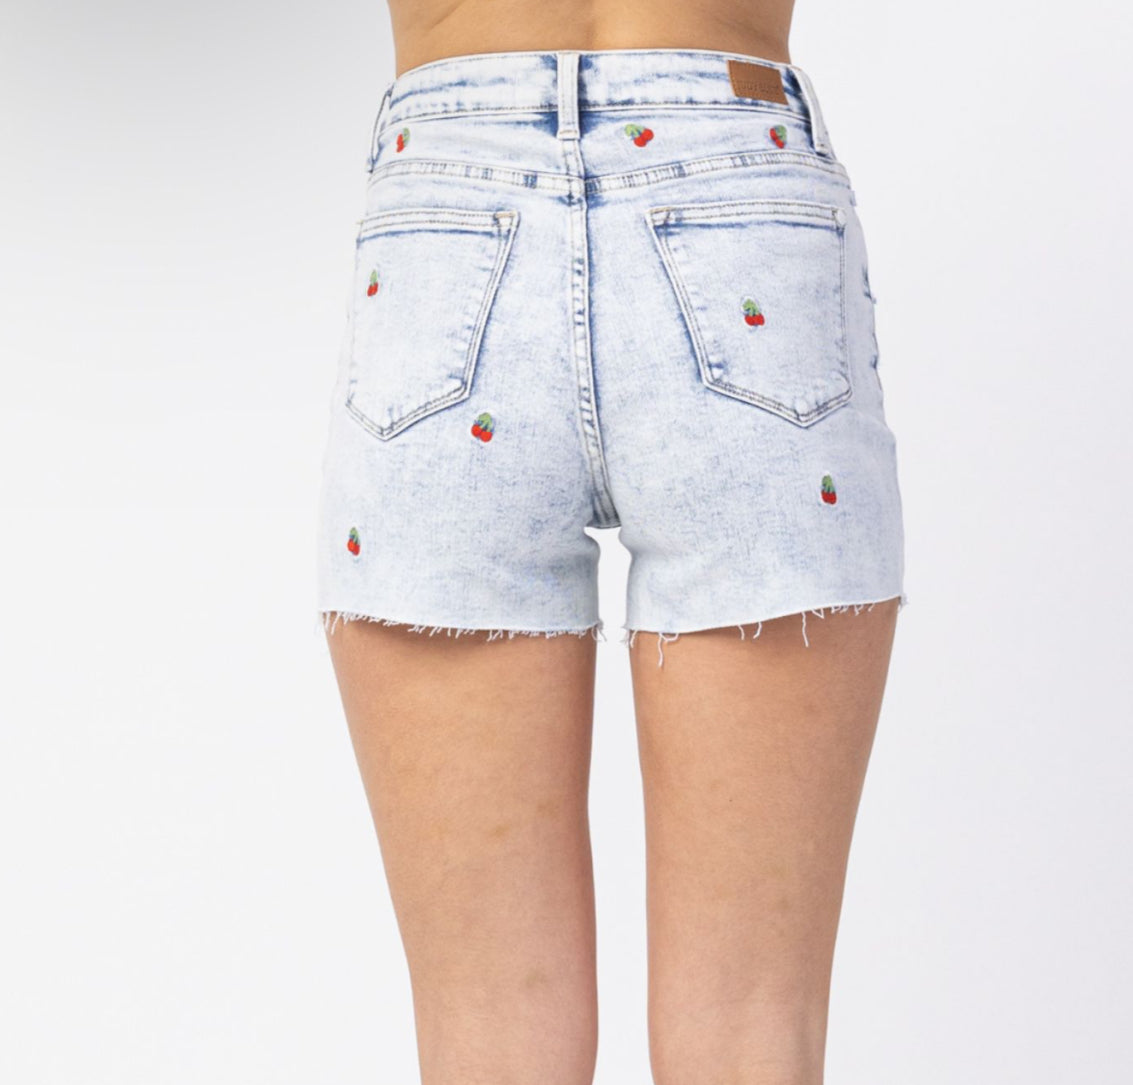 Judy Blue Cherry Bottom Embroidered Shorts